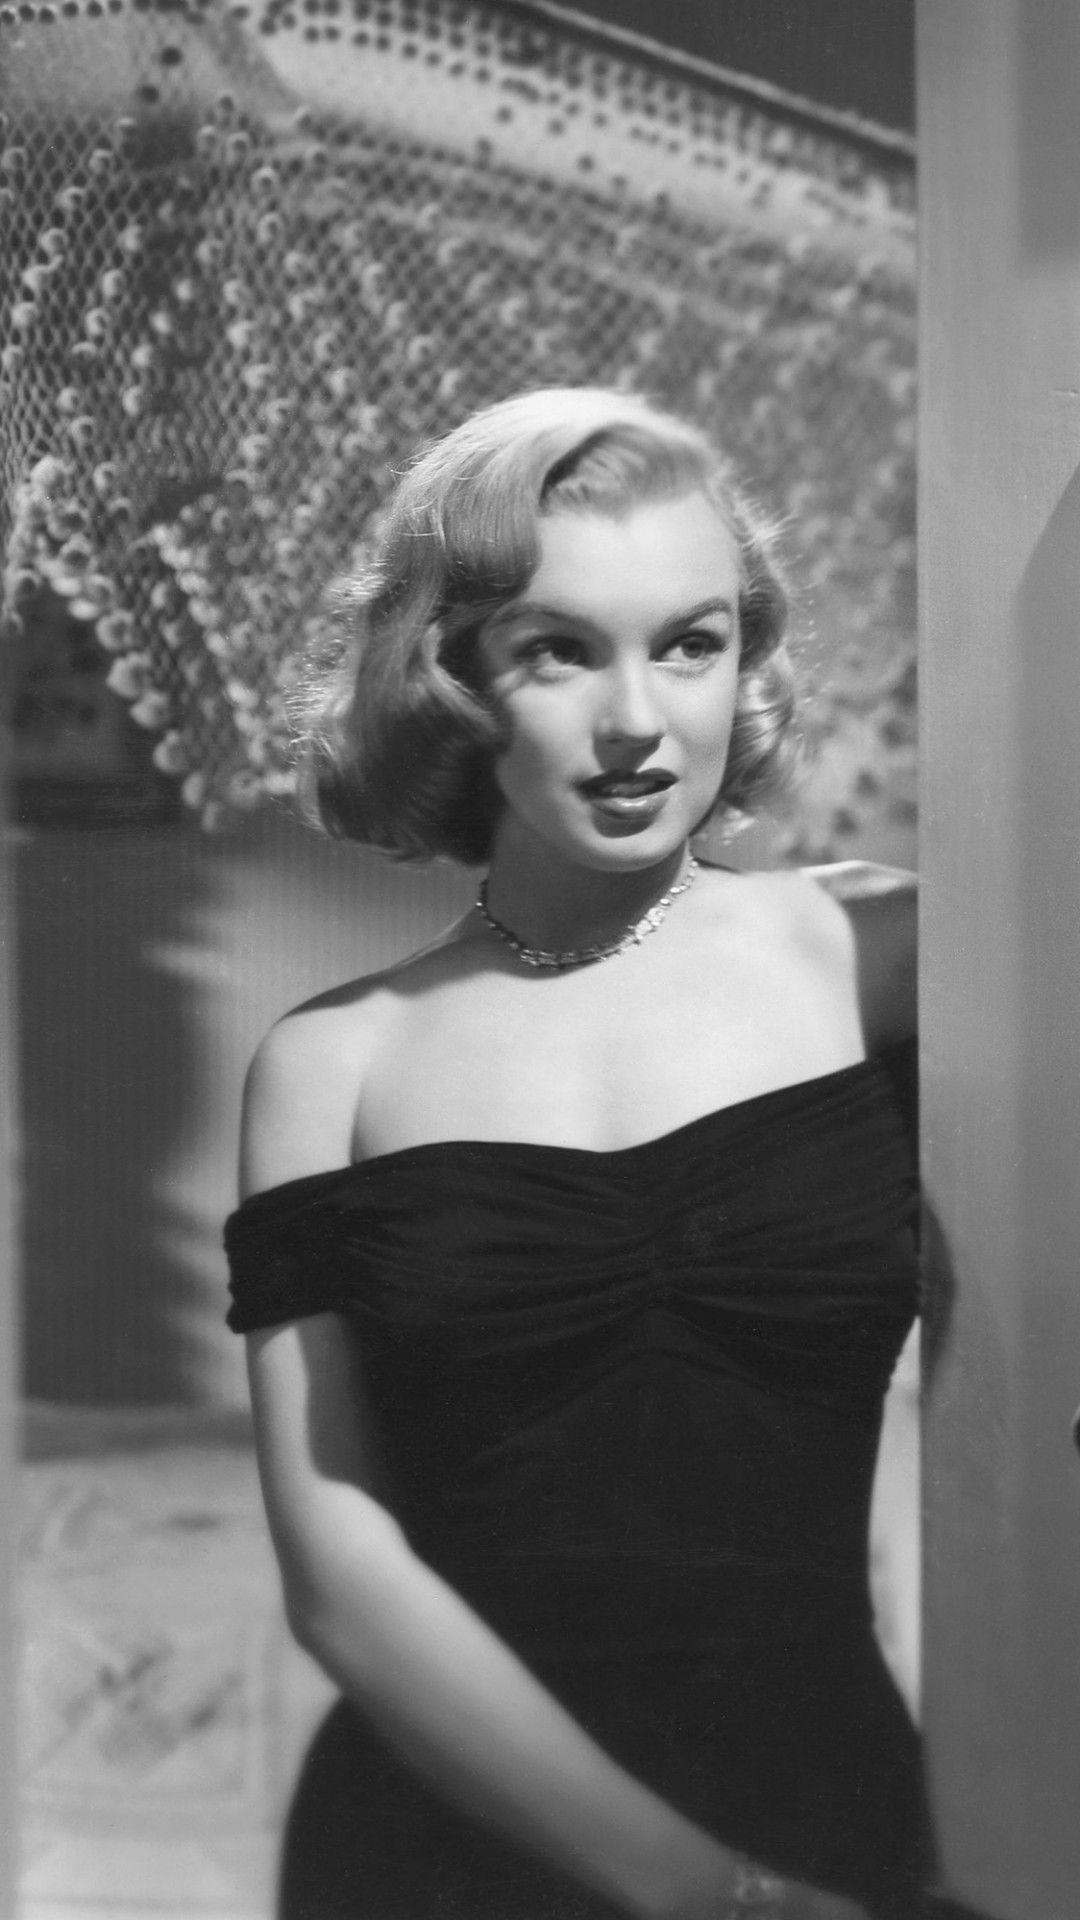 A black and white photo of a woman in a black dress - Marilyn Monroe